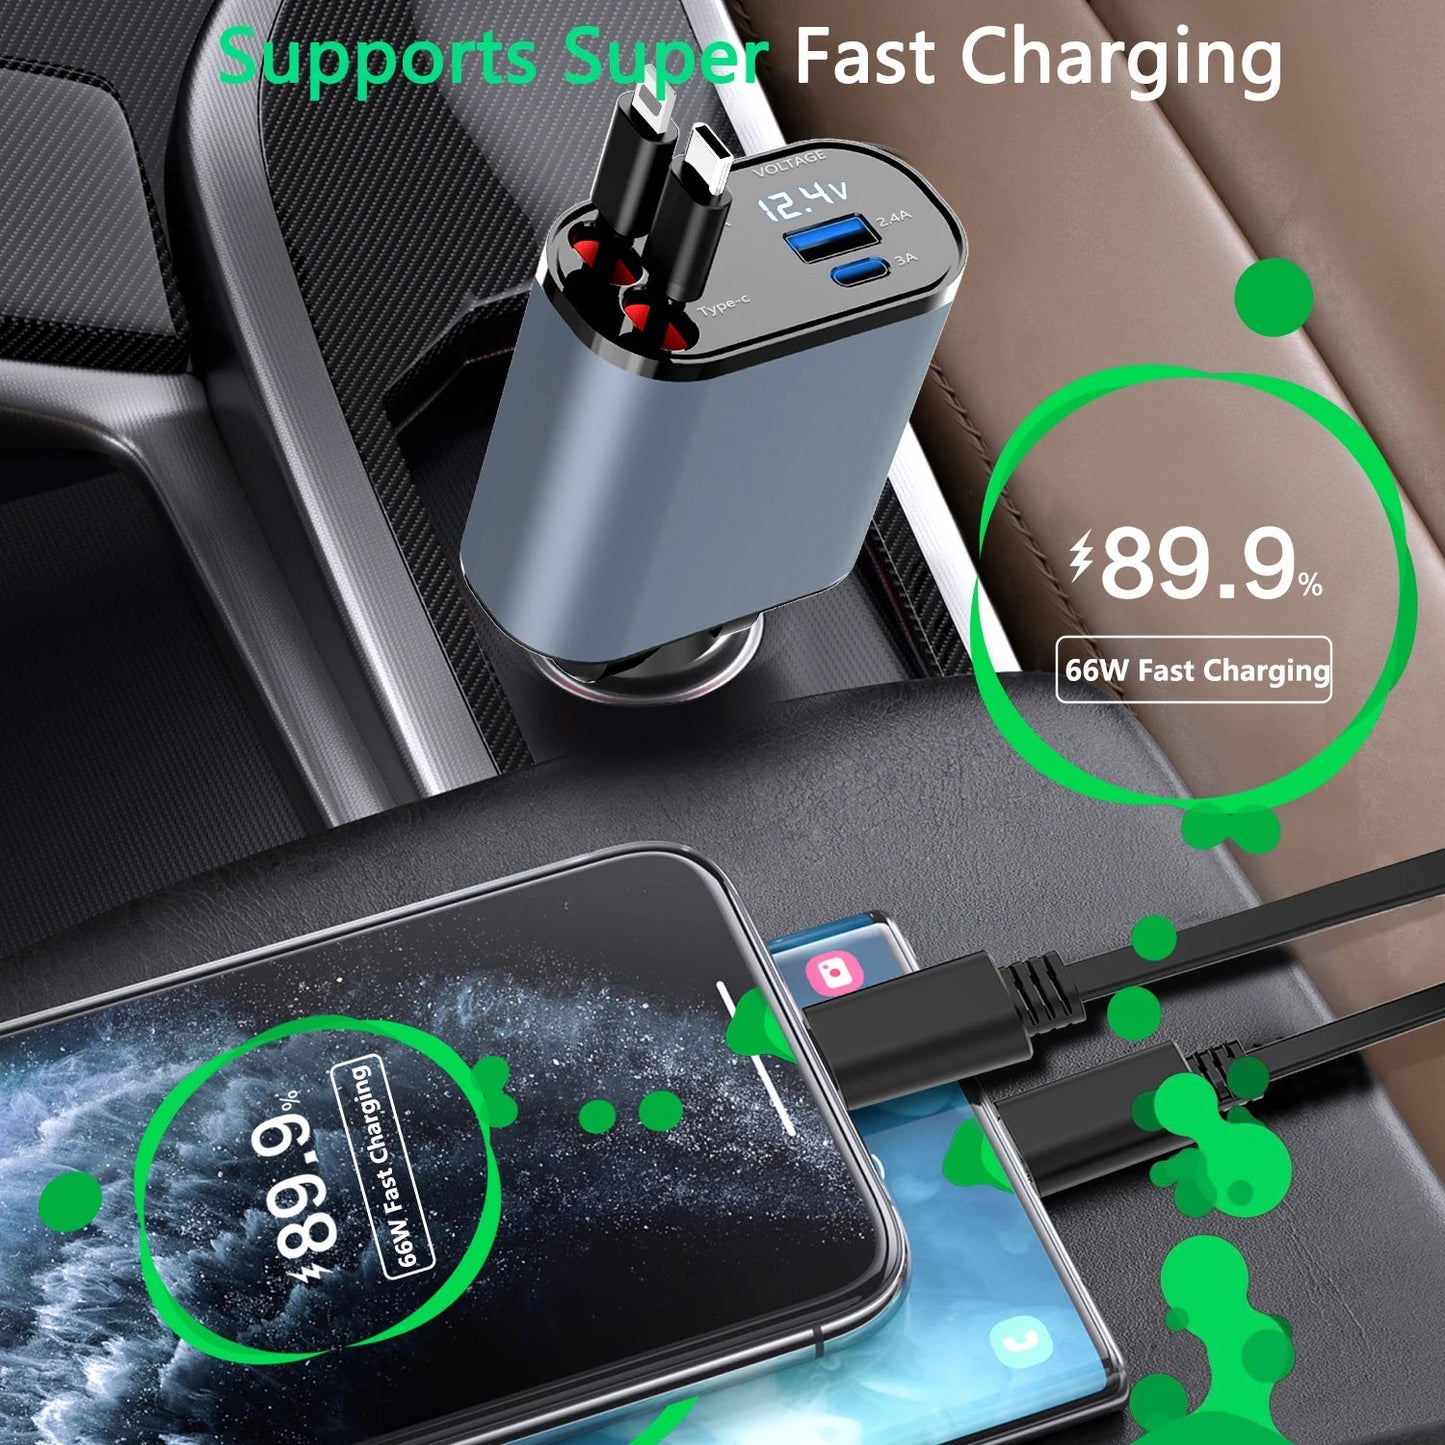 4 in 1 100W Car Charger Retractable USB/Type-C Cable For IPhone Xiaomi Huawei Samsung Fast Charge Cord Cigarette Lighter Adapter Retractable